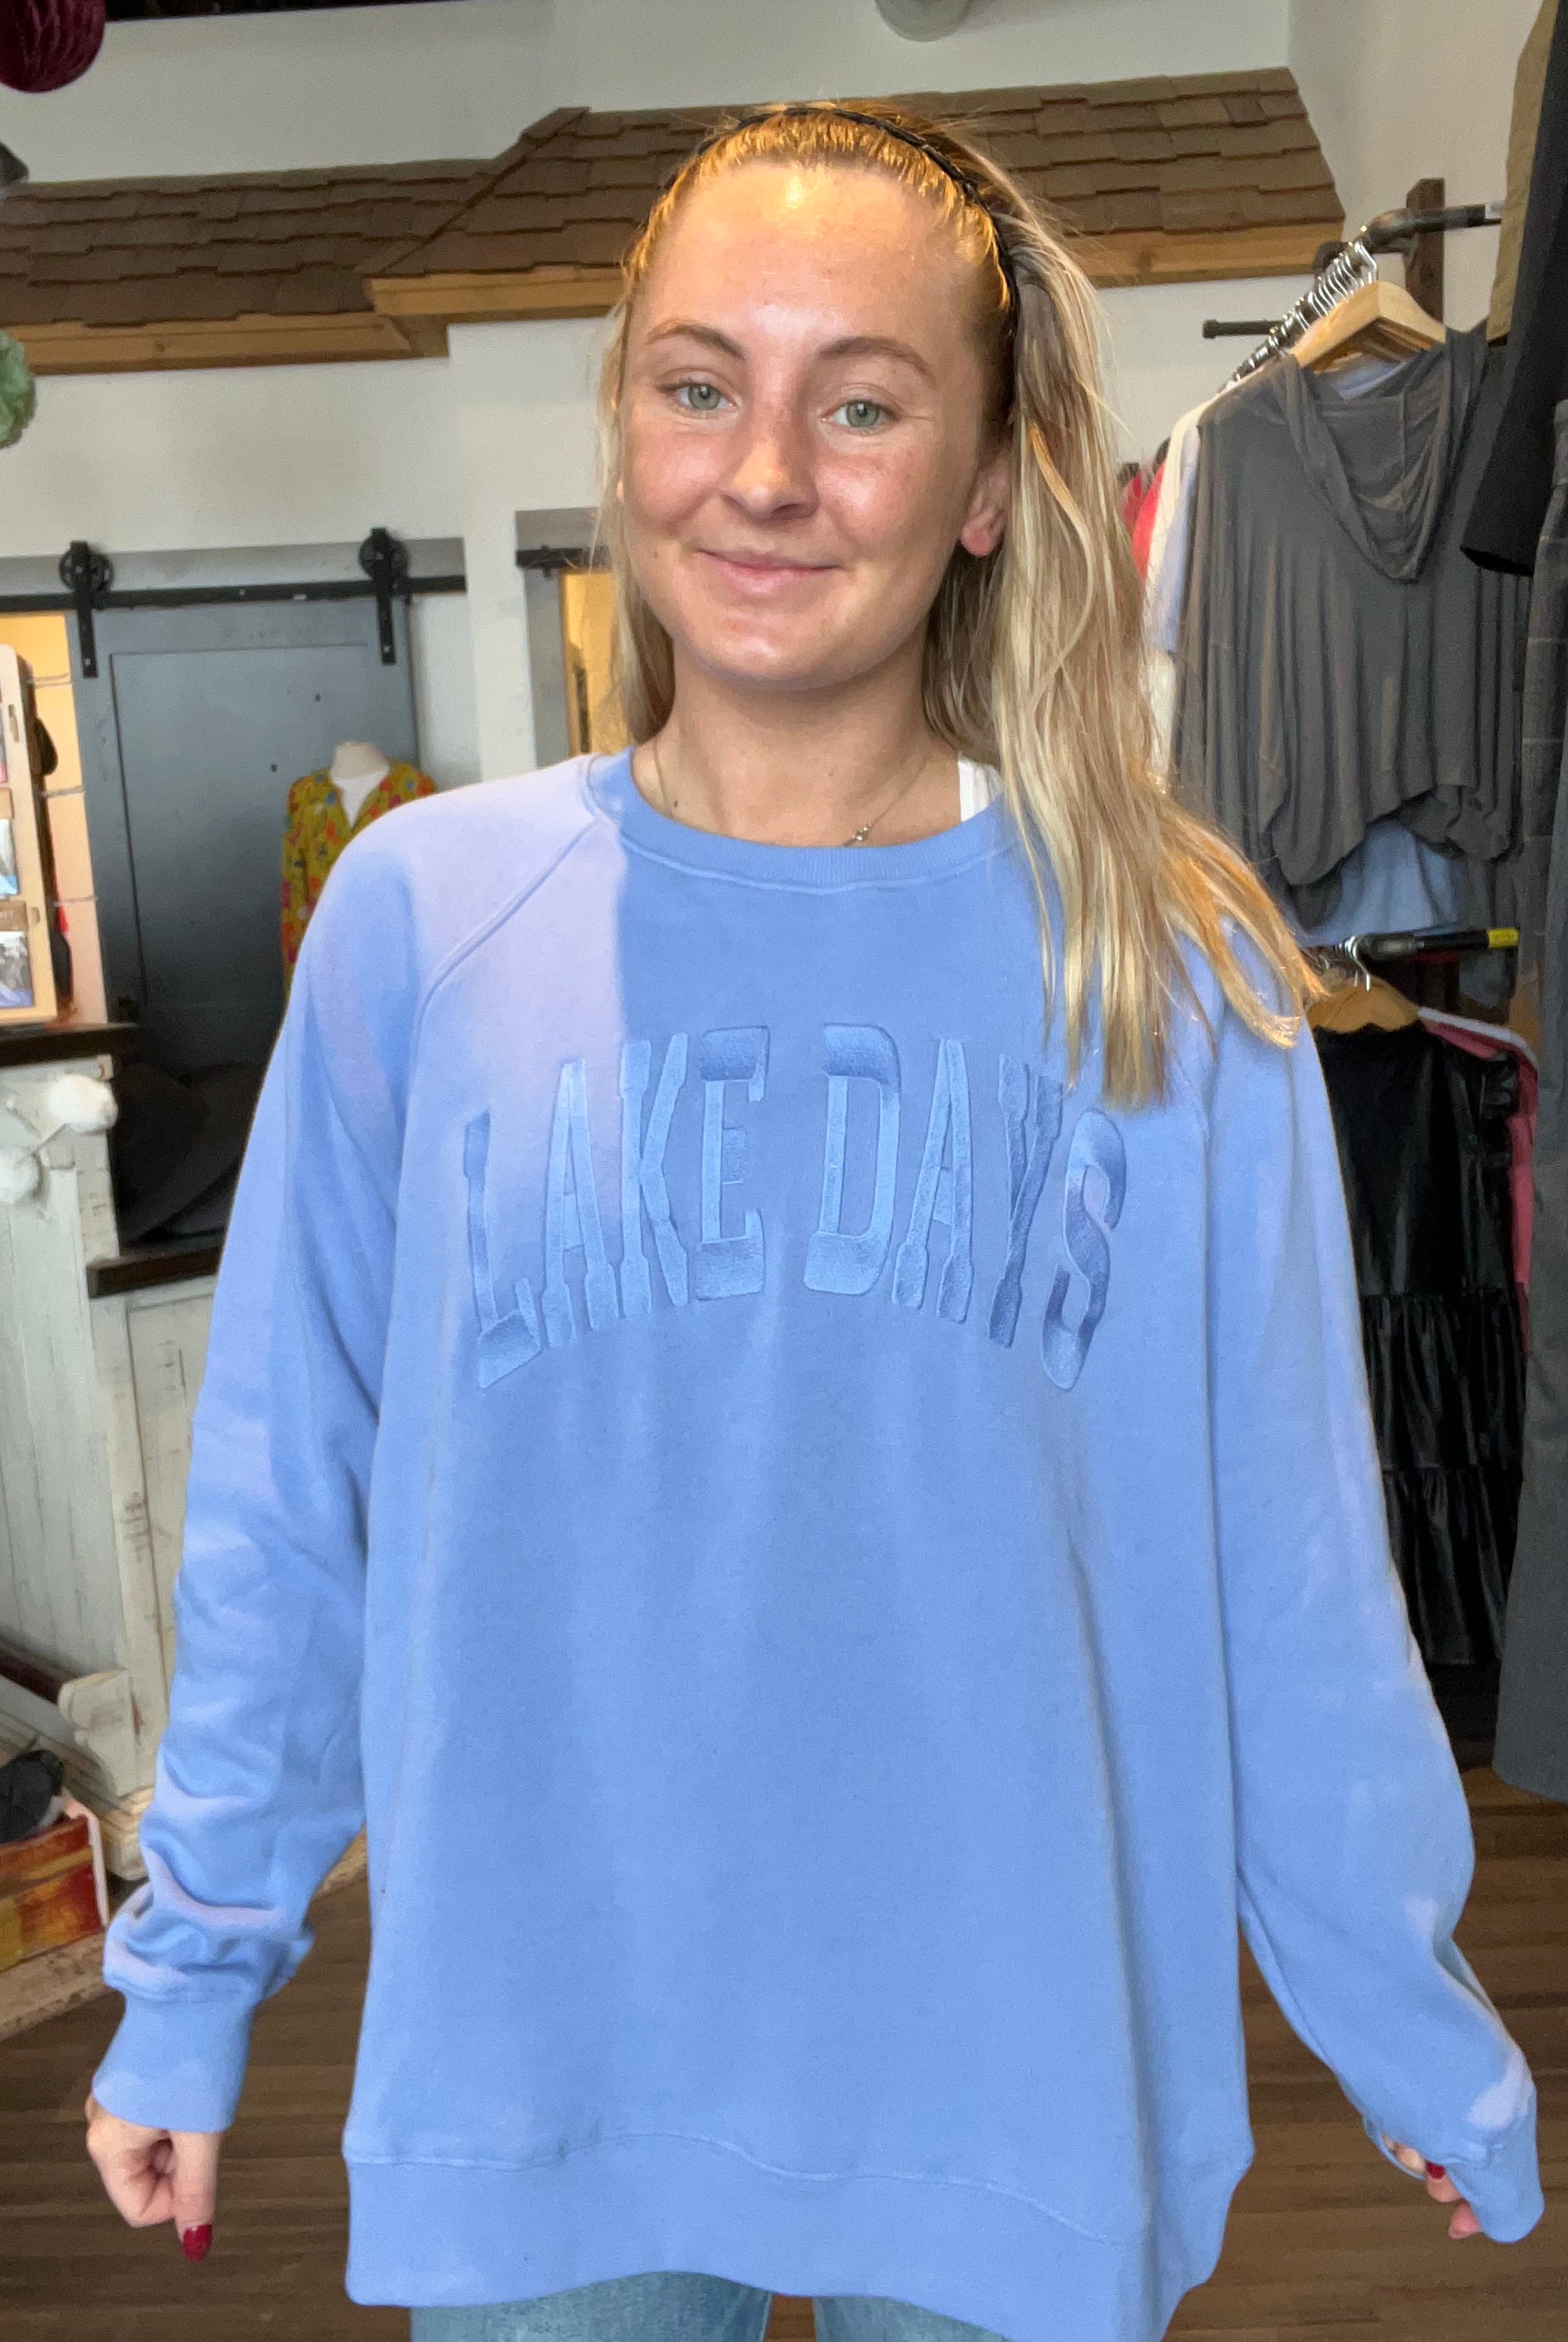 Lake Days Sweatshirt-Graphic Sweaters-Thread and Supply-The Funky Zebra Ames, Women's Fashion Boutique in Ames, Iowa